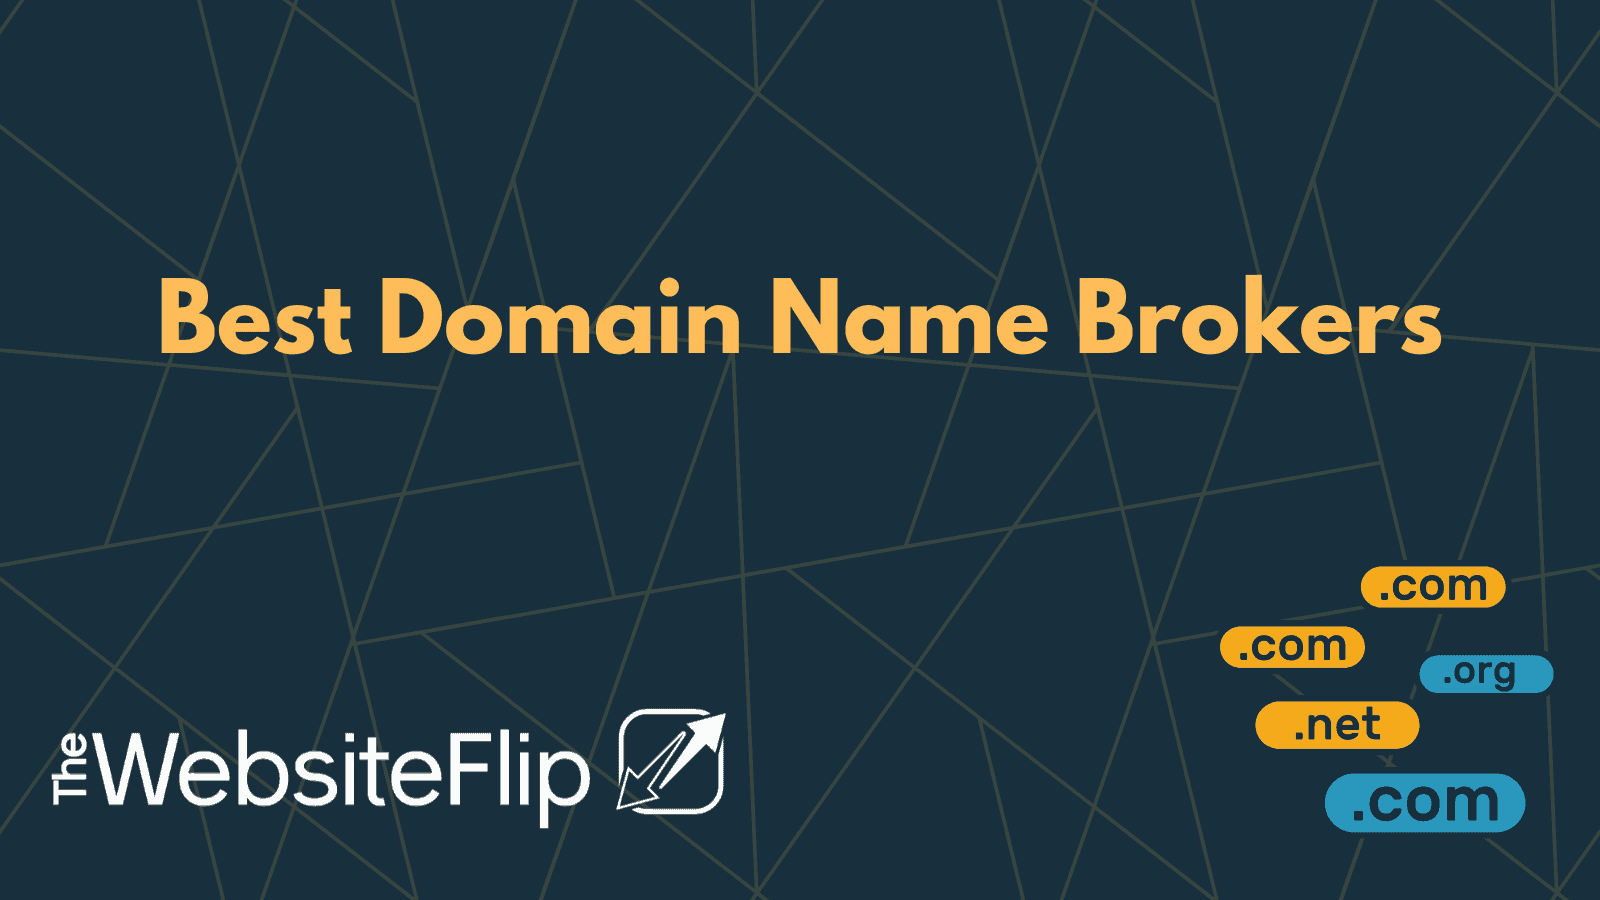 Best Domain Name Brokers: How To Options, Benefits